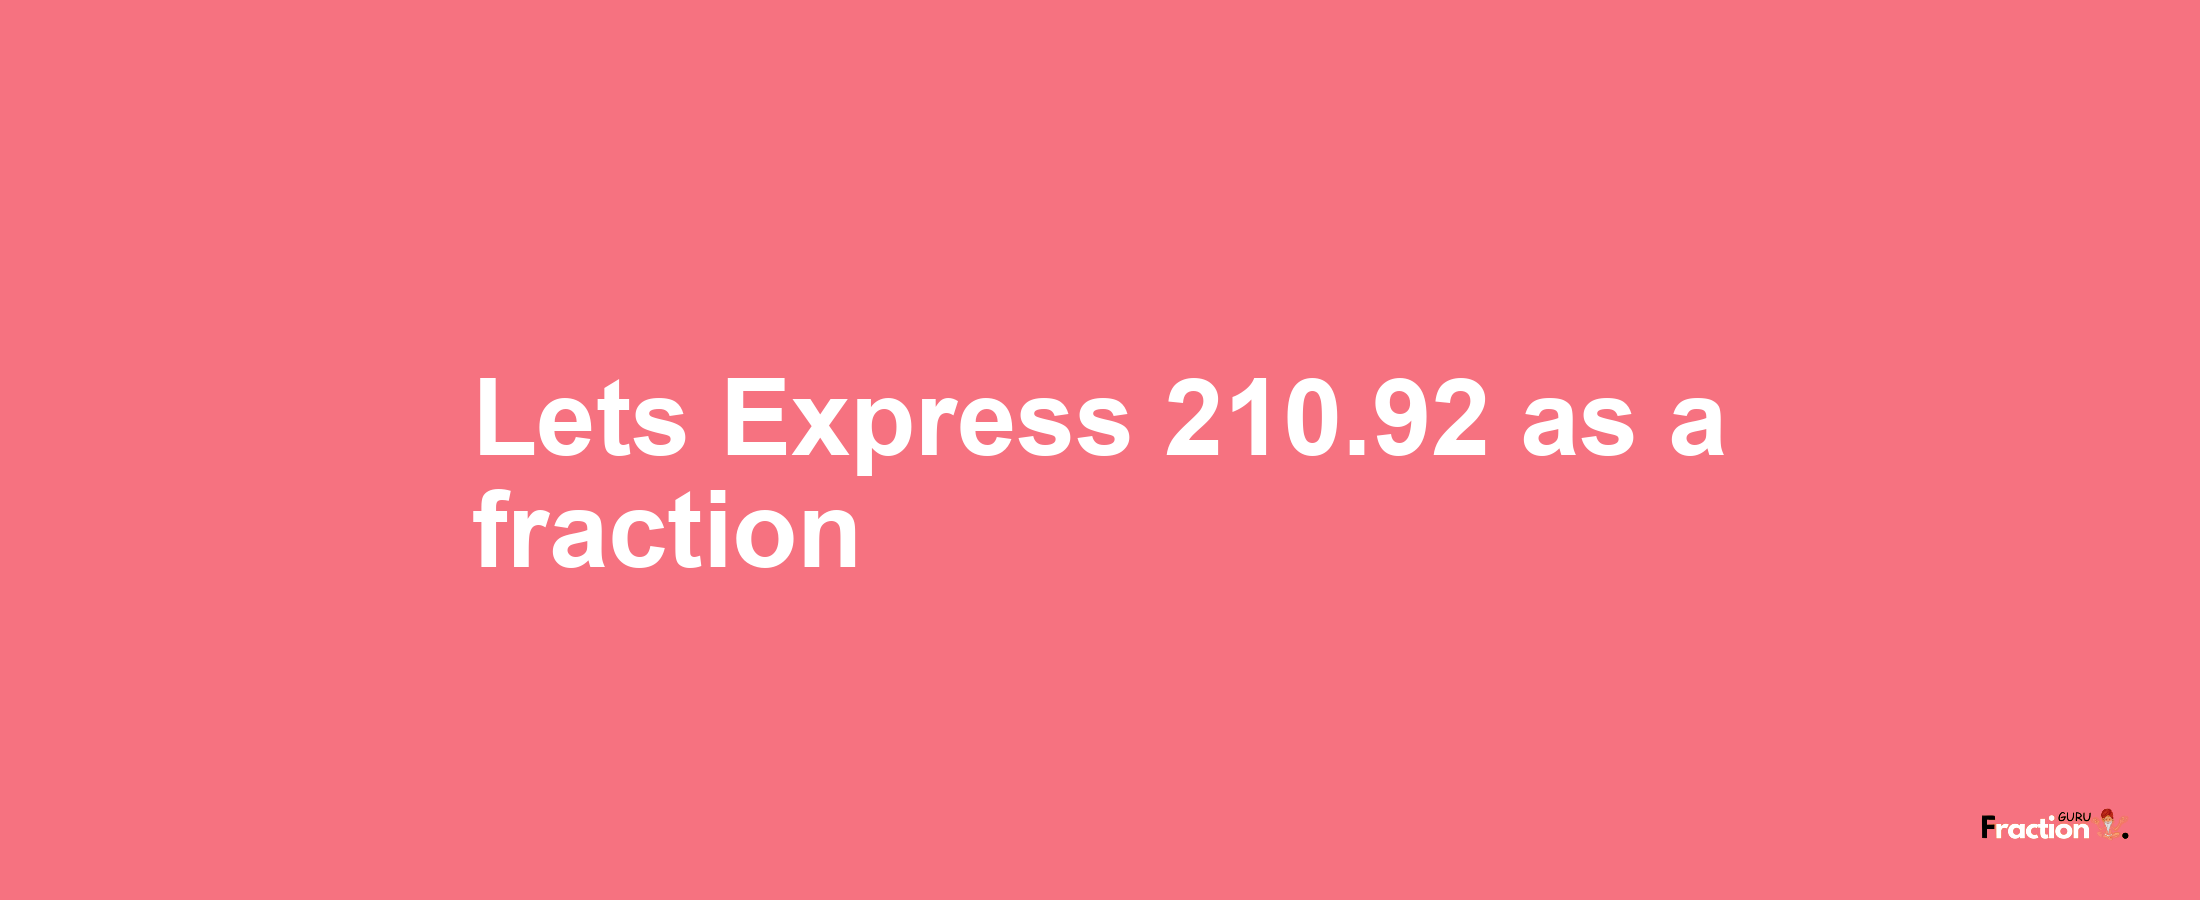 Lets Express 210.92 as afraction